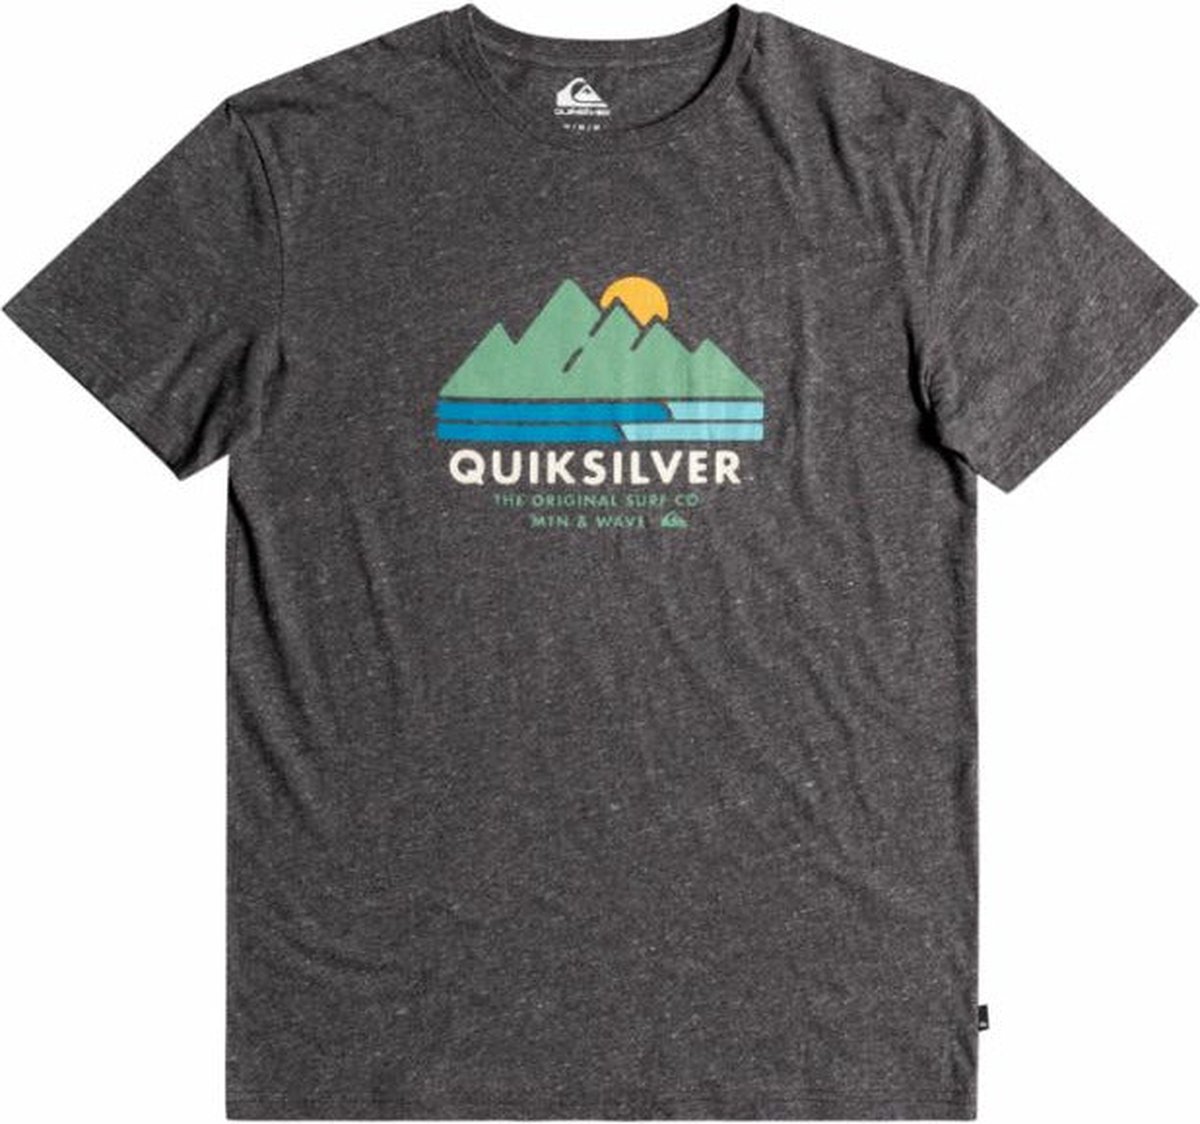 Quiksilver Scenicrecovery T-shirt Short Sleeve - Charcoal Heather